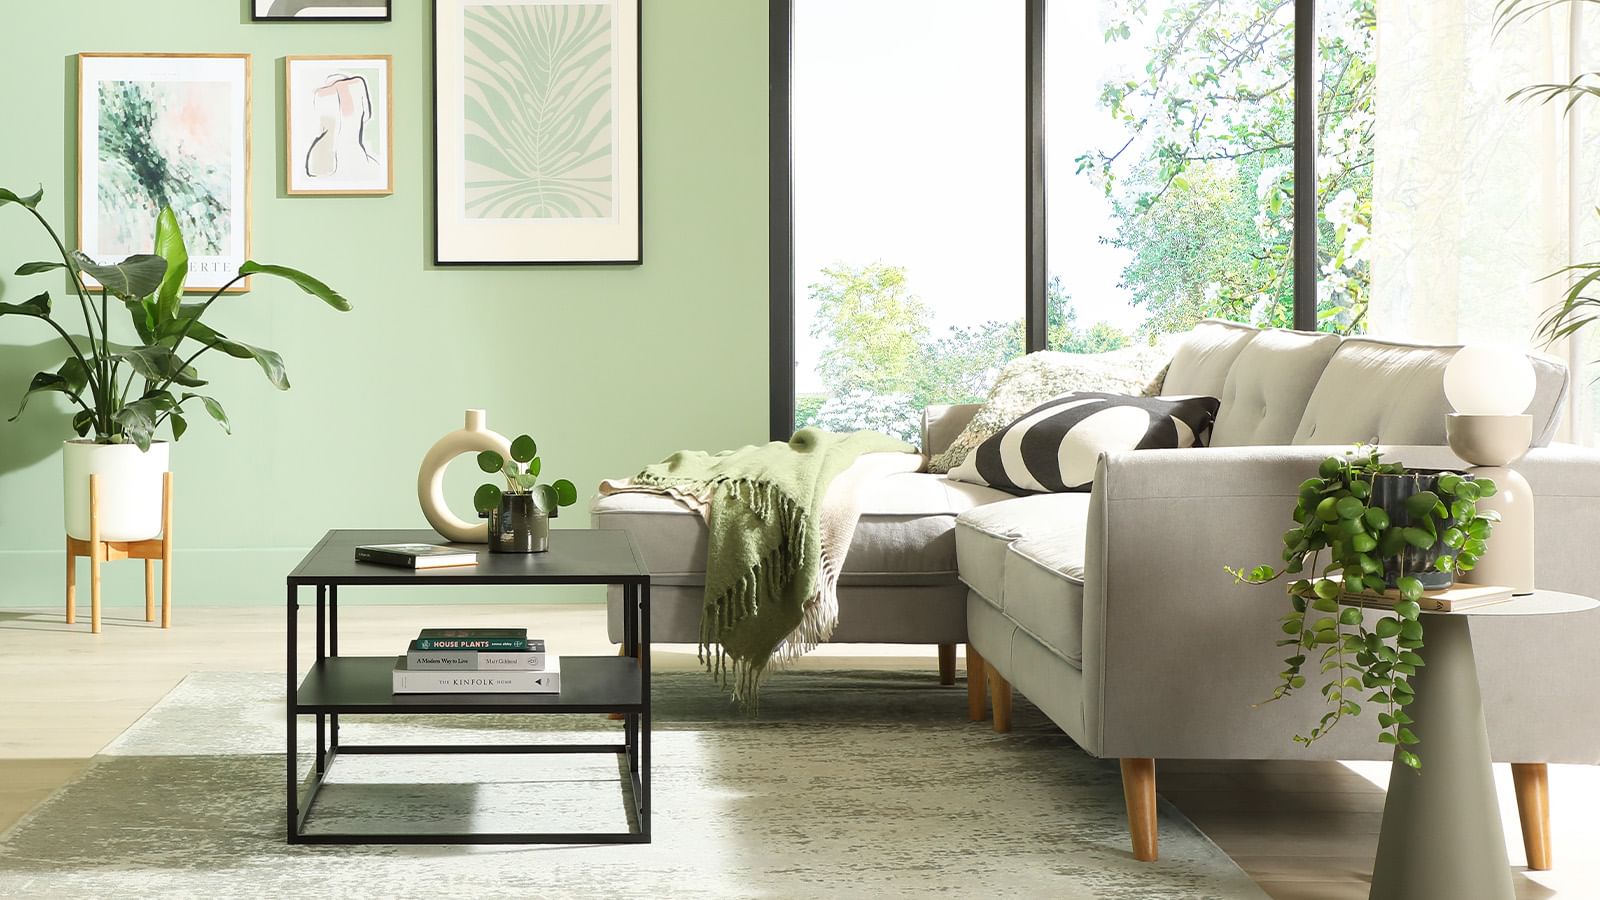 How to style your home interior to improve wellbeing